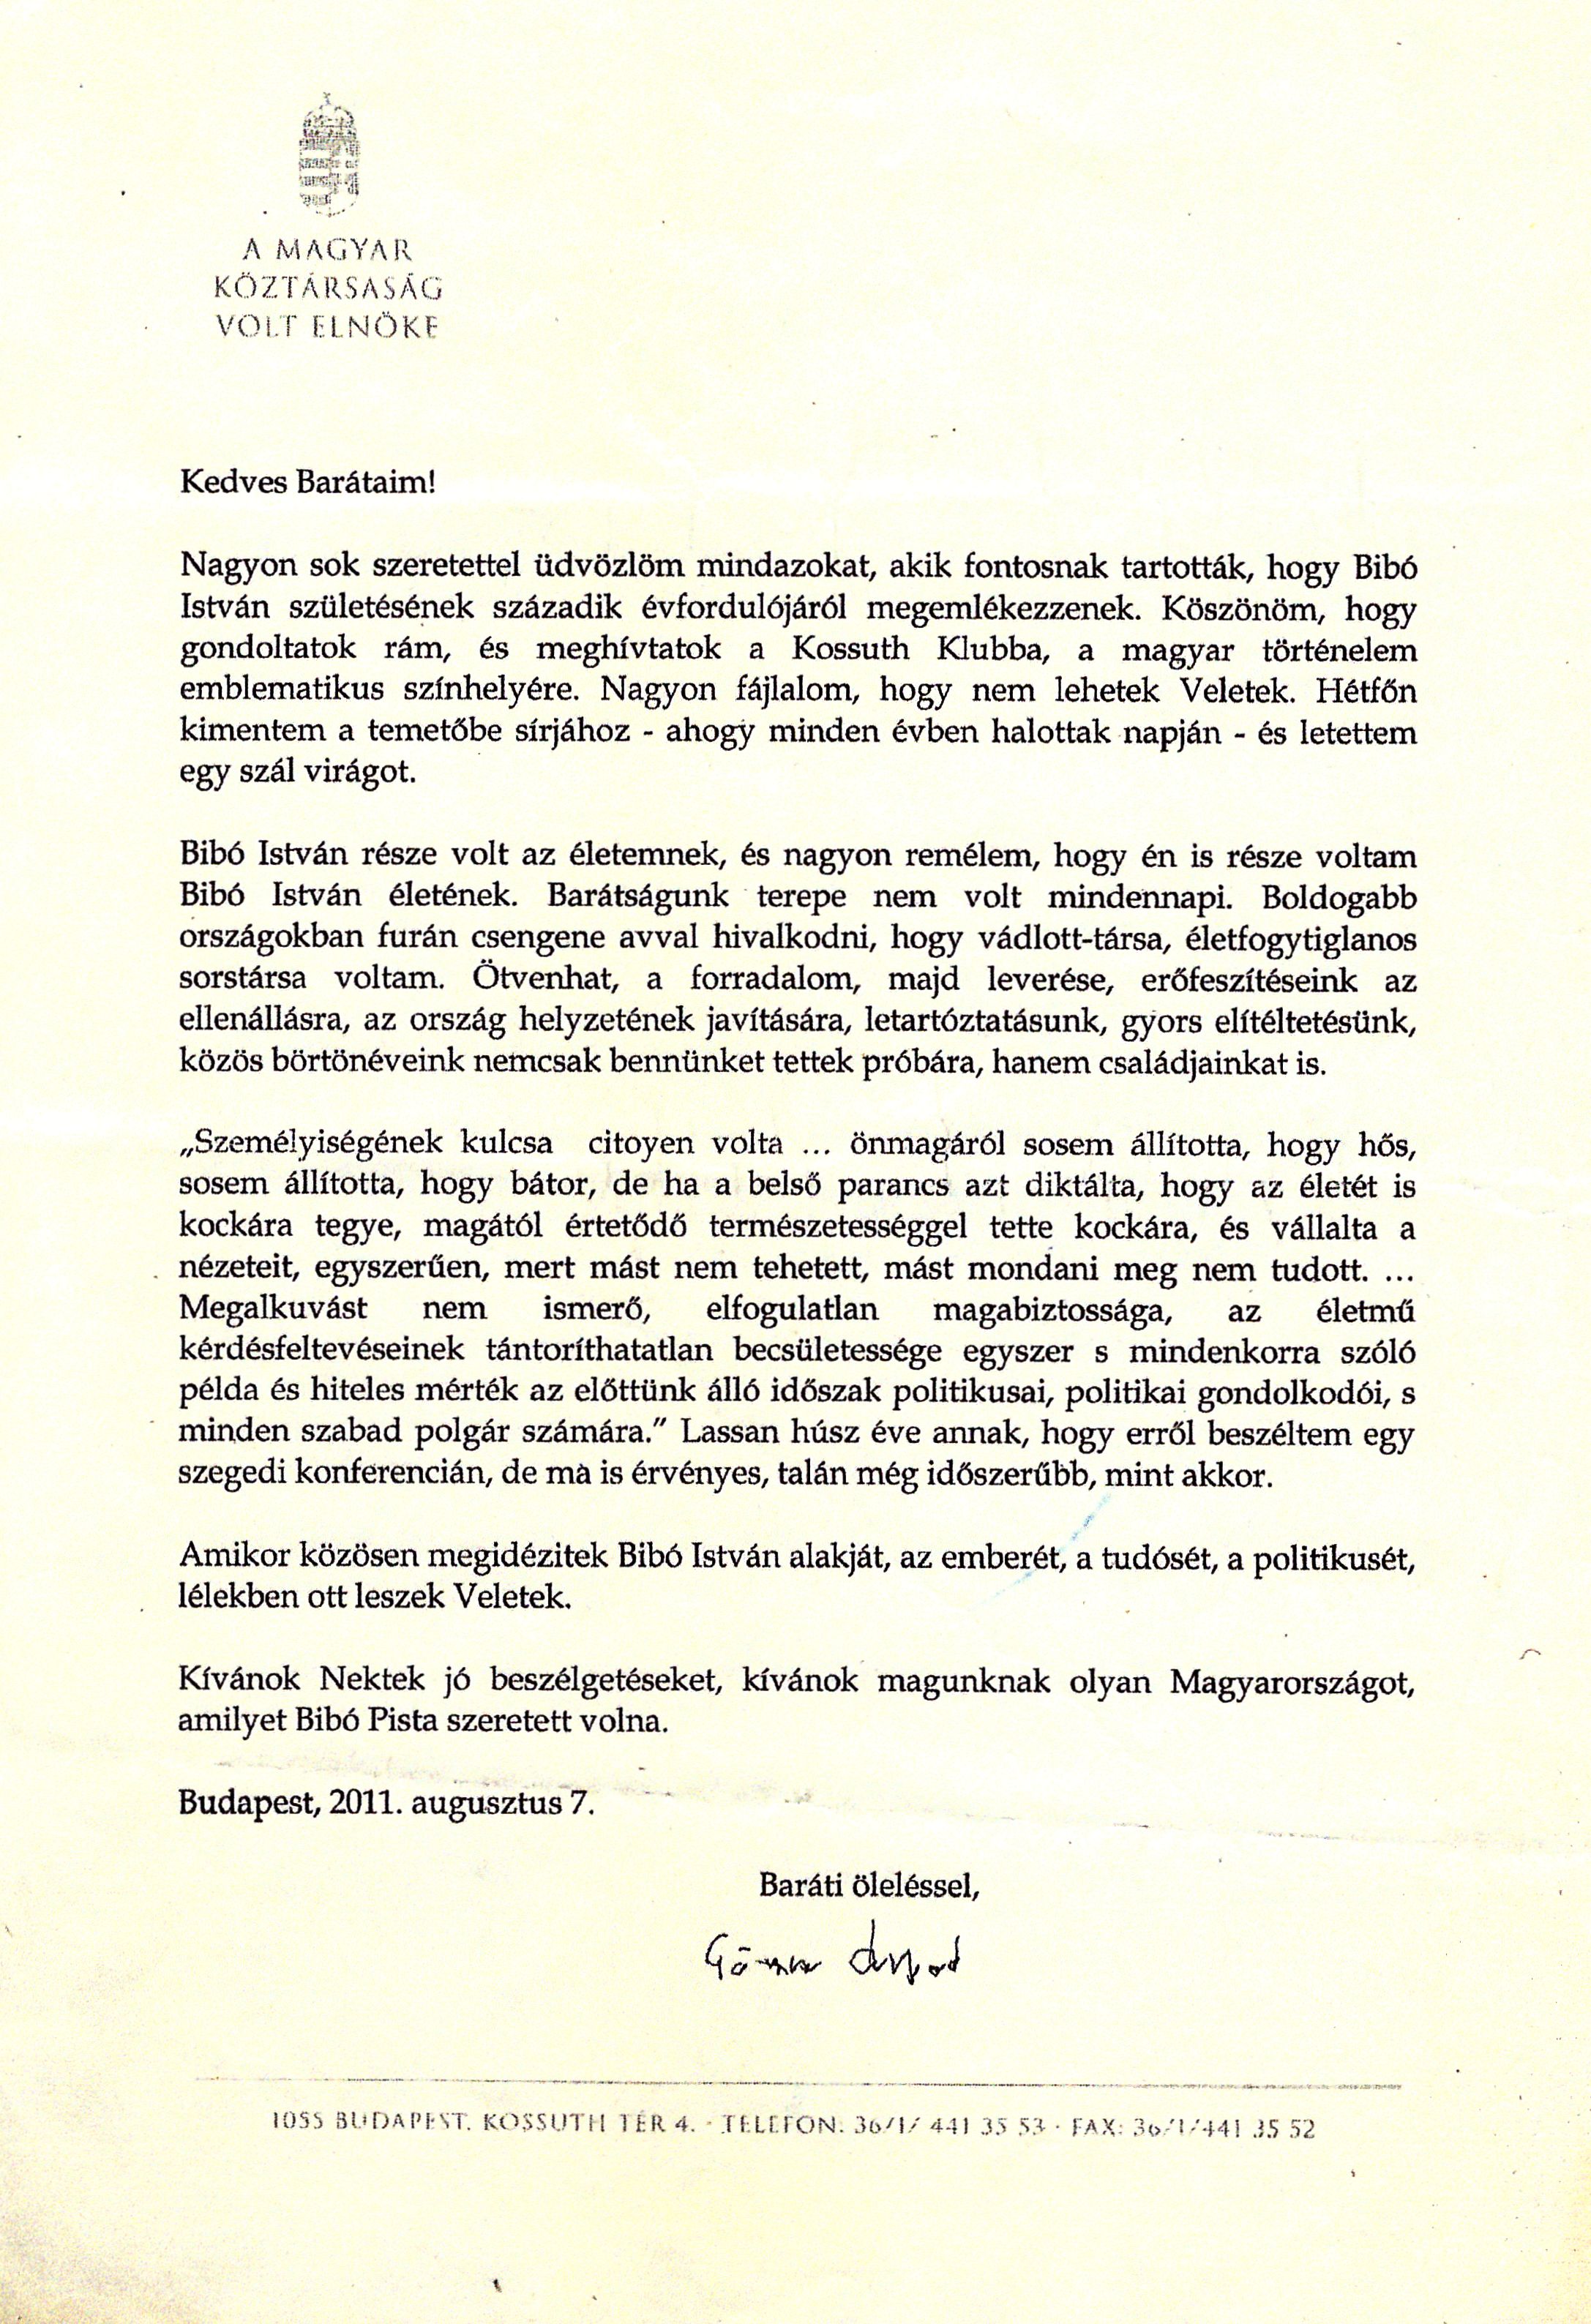 Ex-President Árpád Göncz's letter to the participants of a jubilary conference held at Kossuth Klub, Budapest